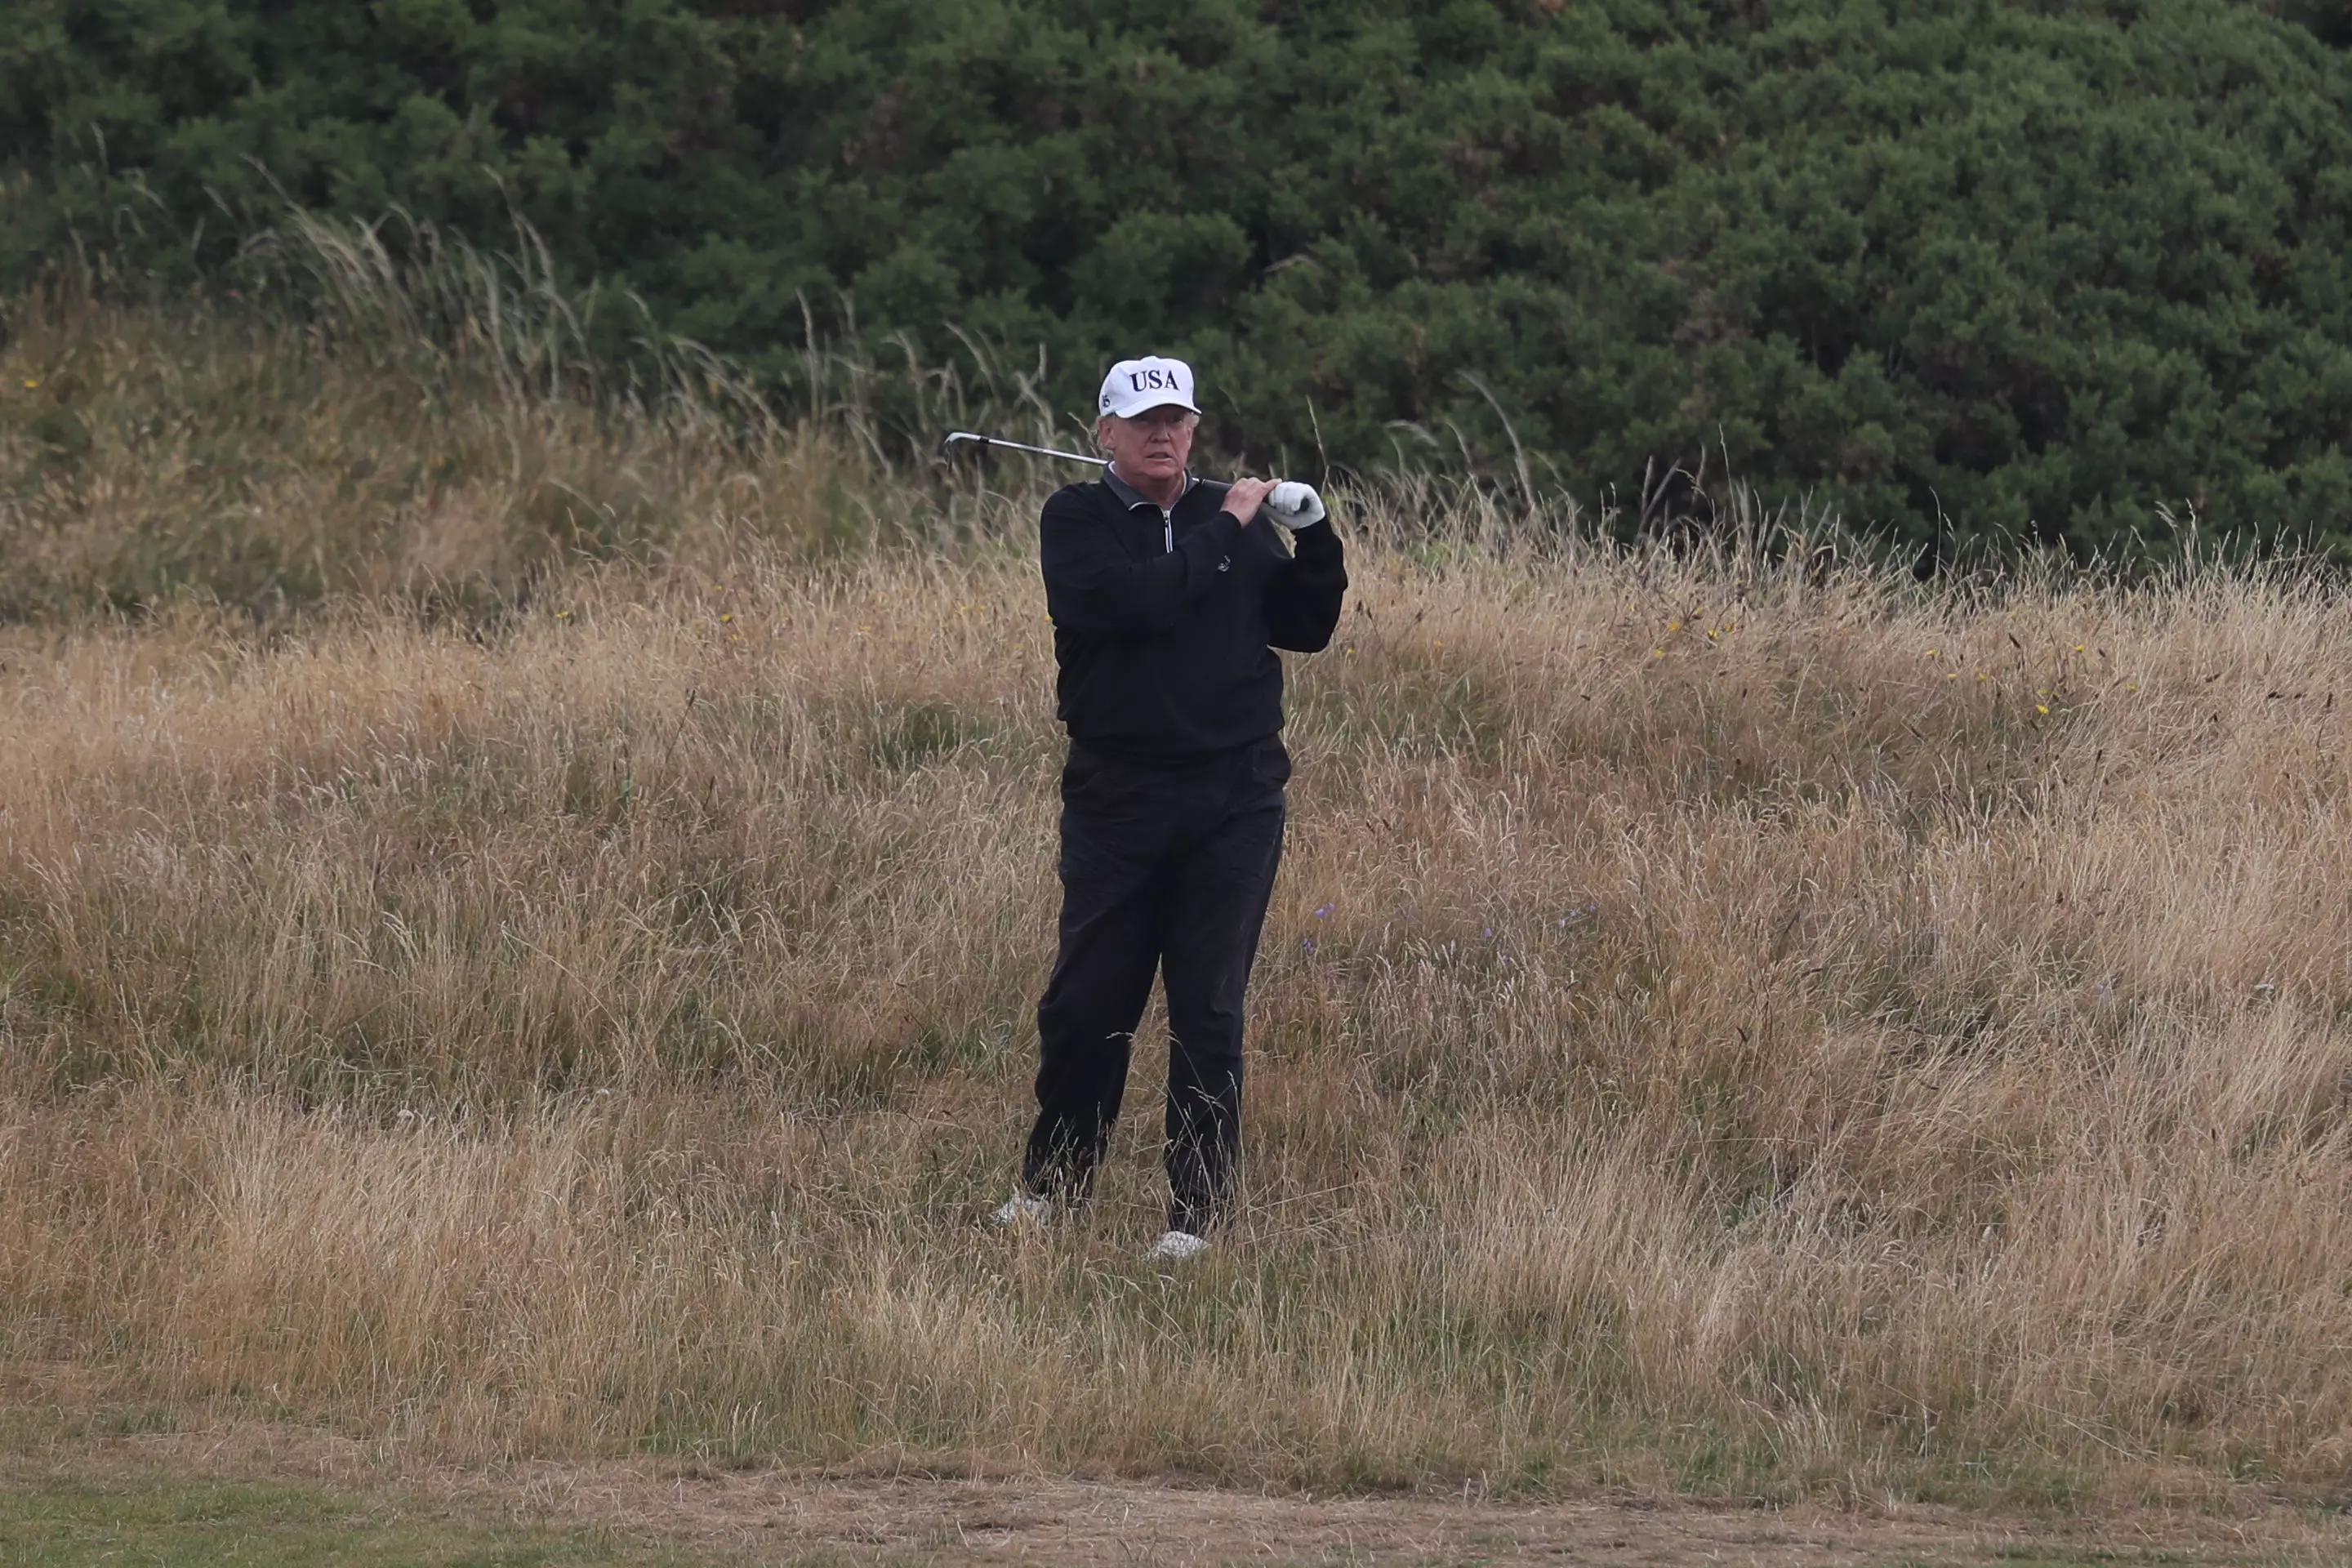 Trump plays out of the rough at Turnberry.